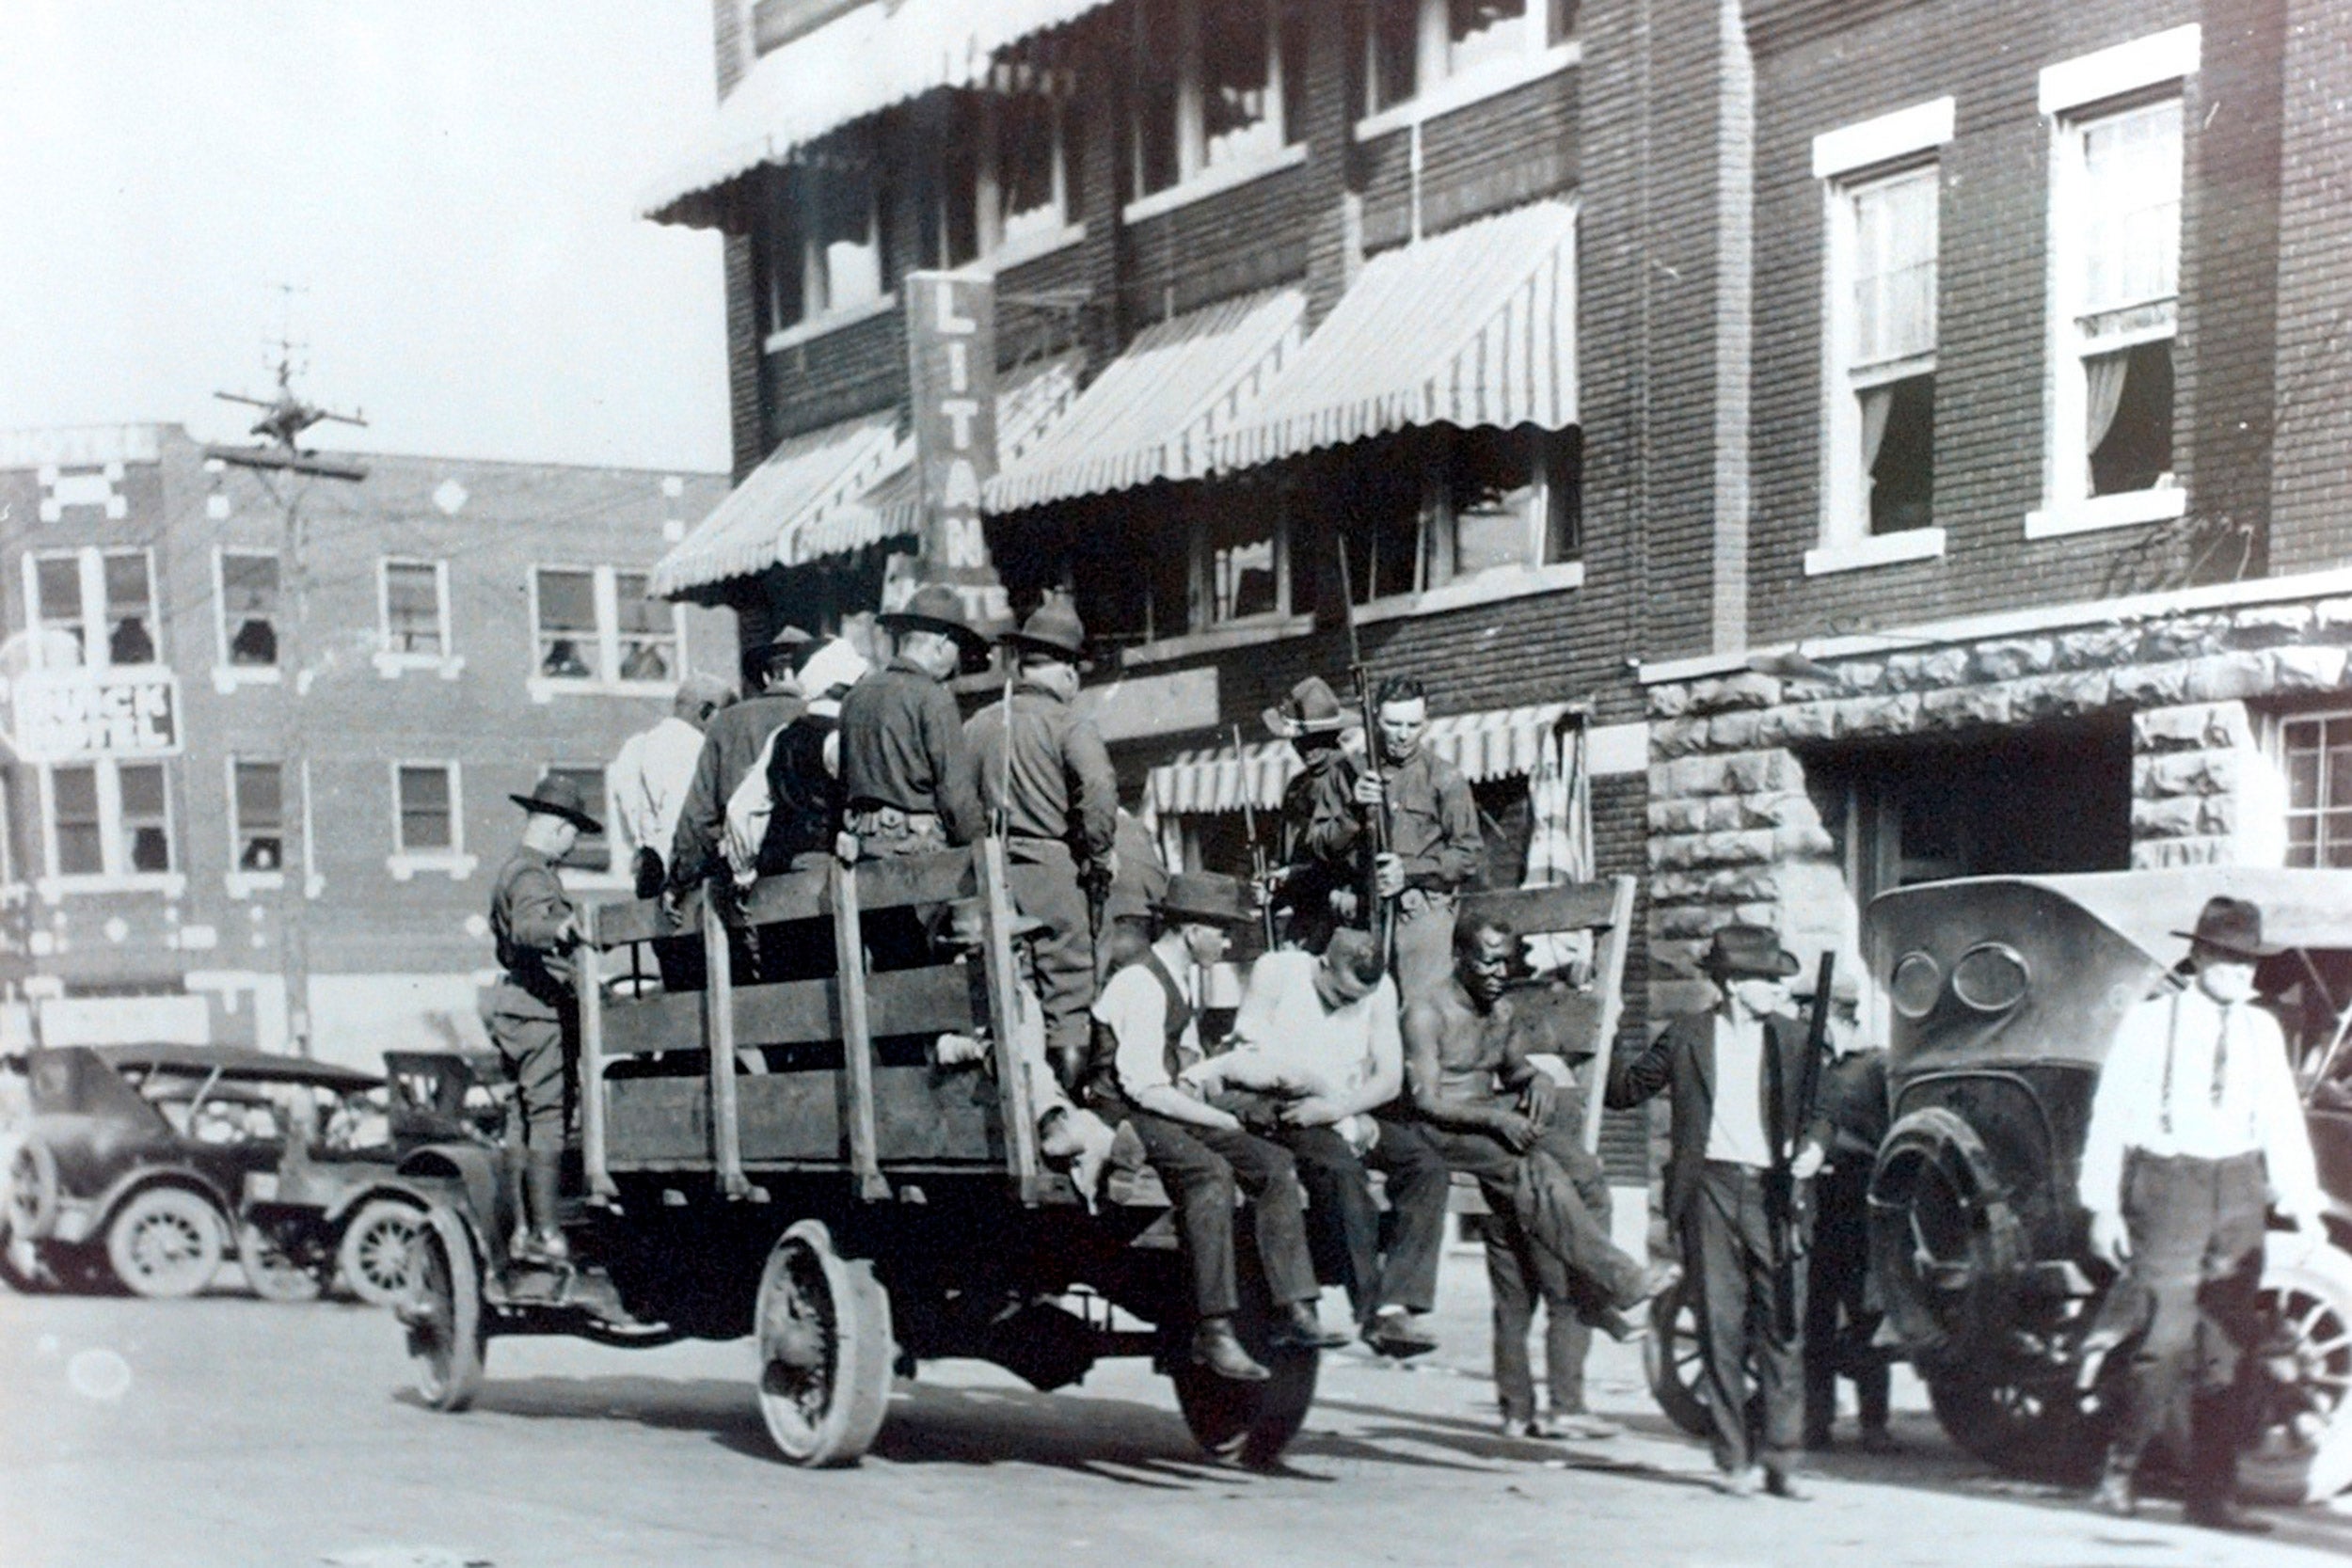 Men injured from the 1921 riots in Tulsa.